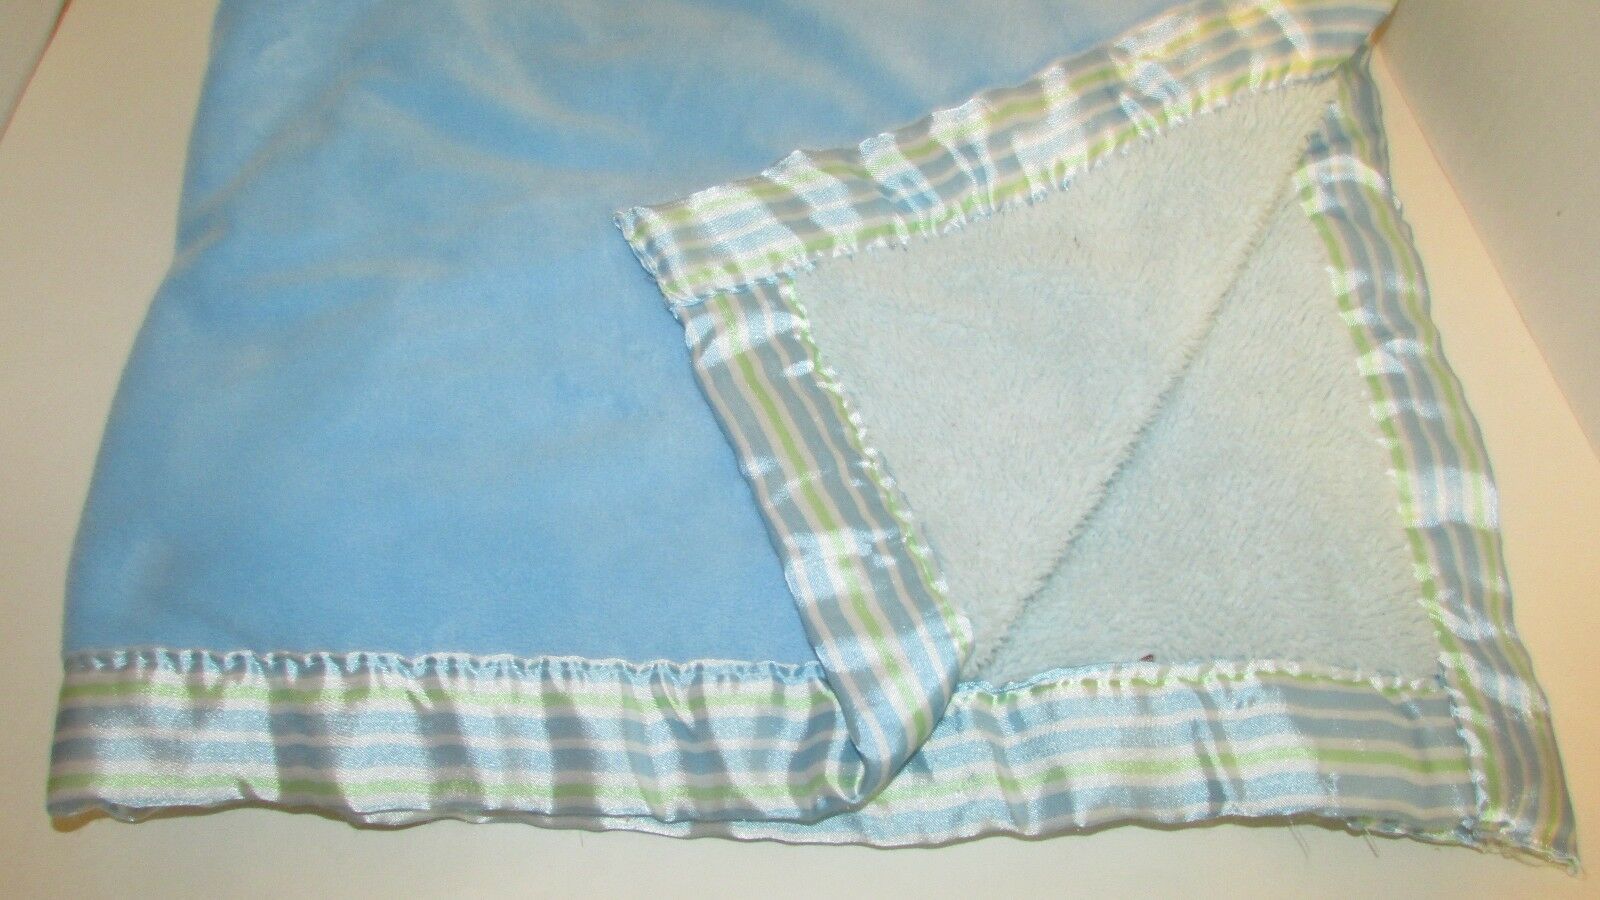 Primary image for Baby Blanket Blankets & Beyond thick plush blue green white striped satin trim